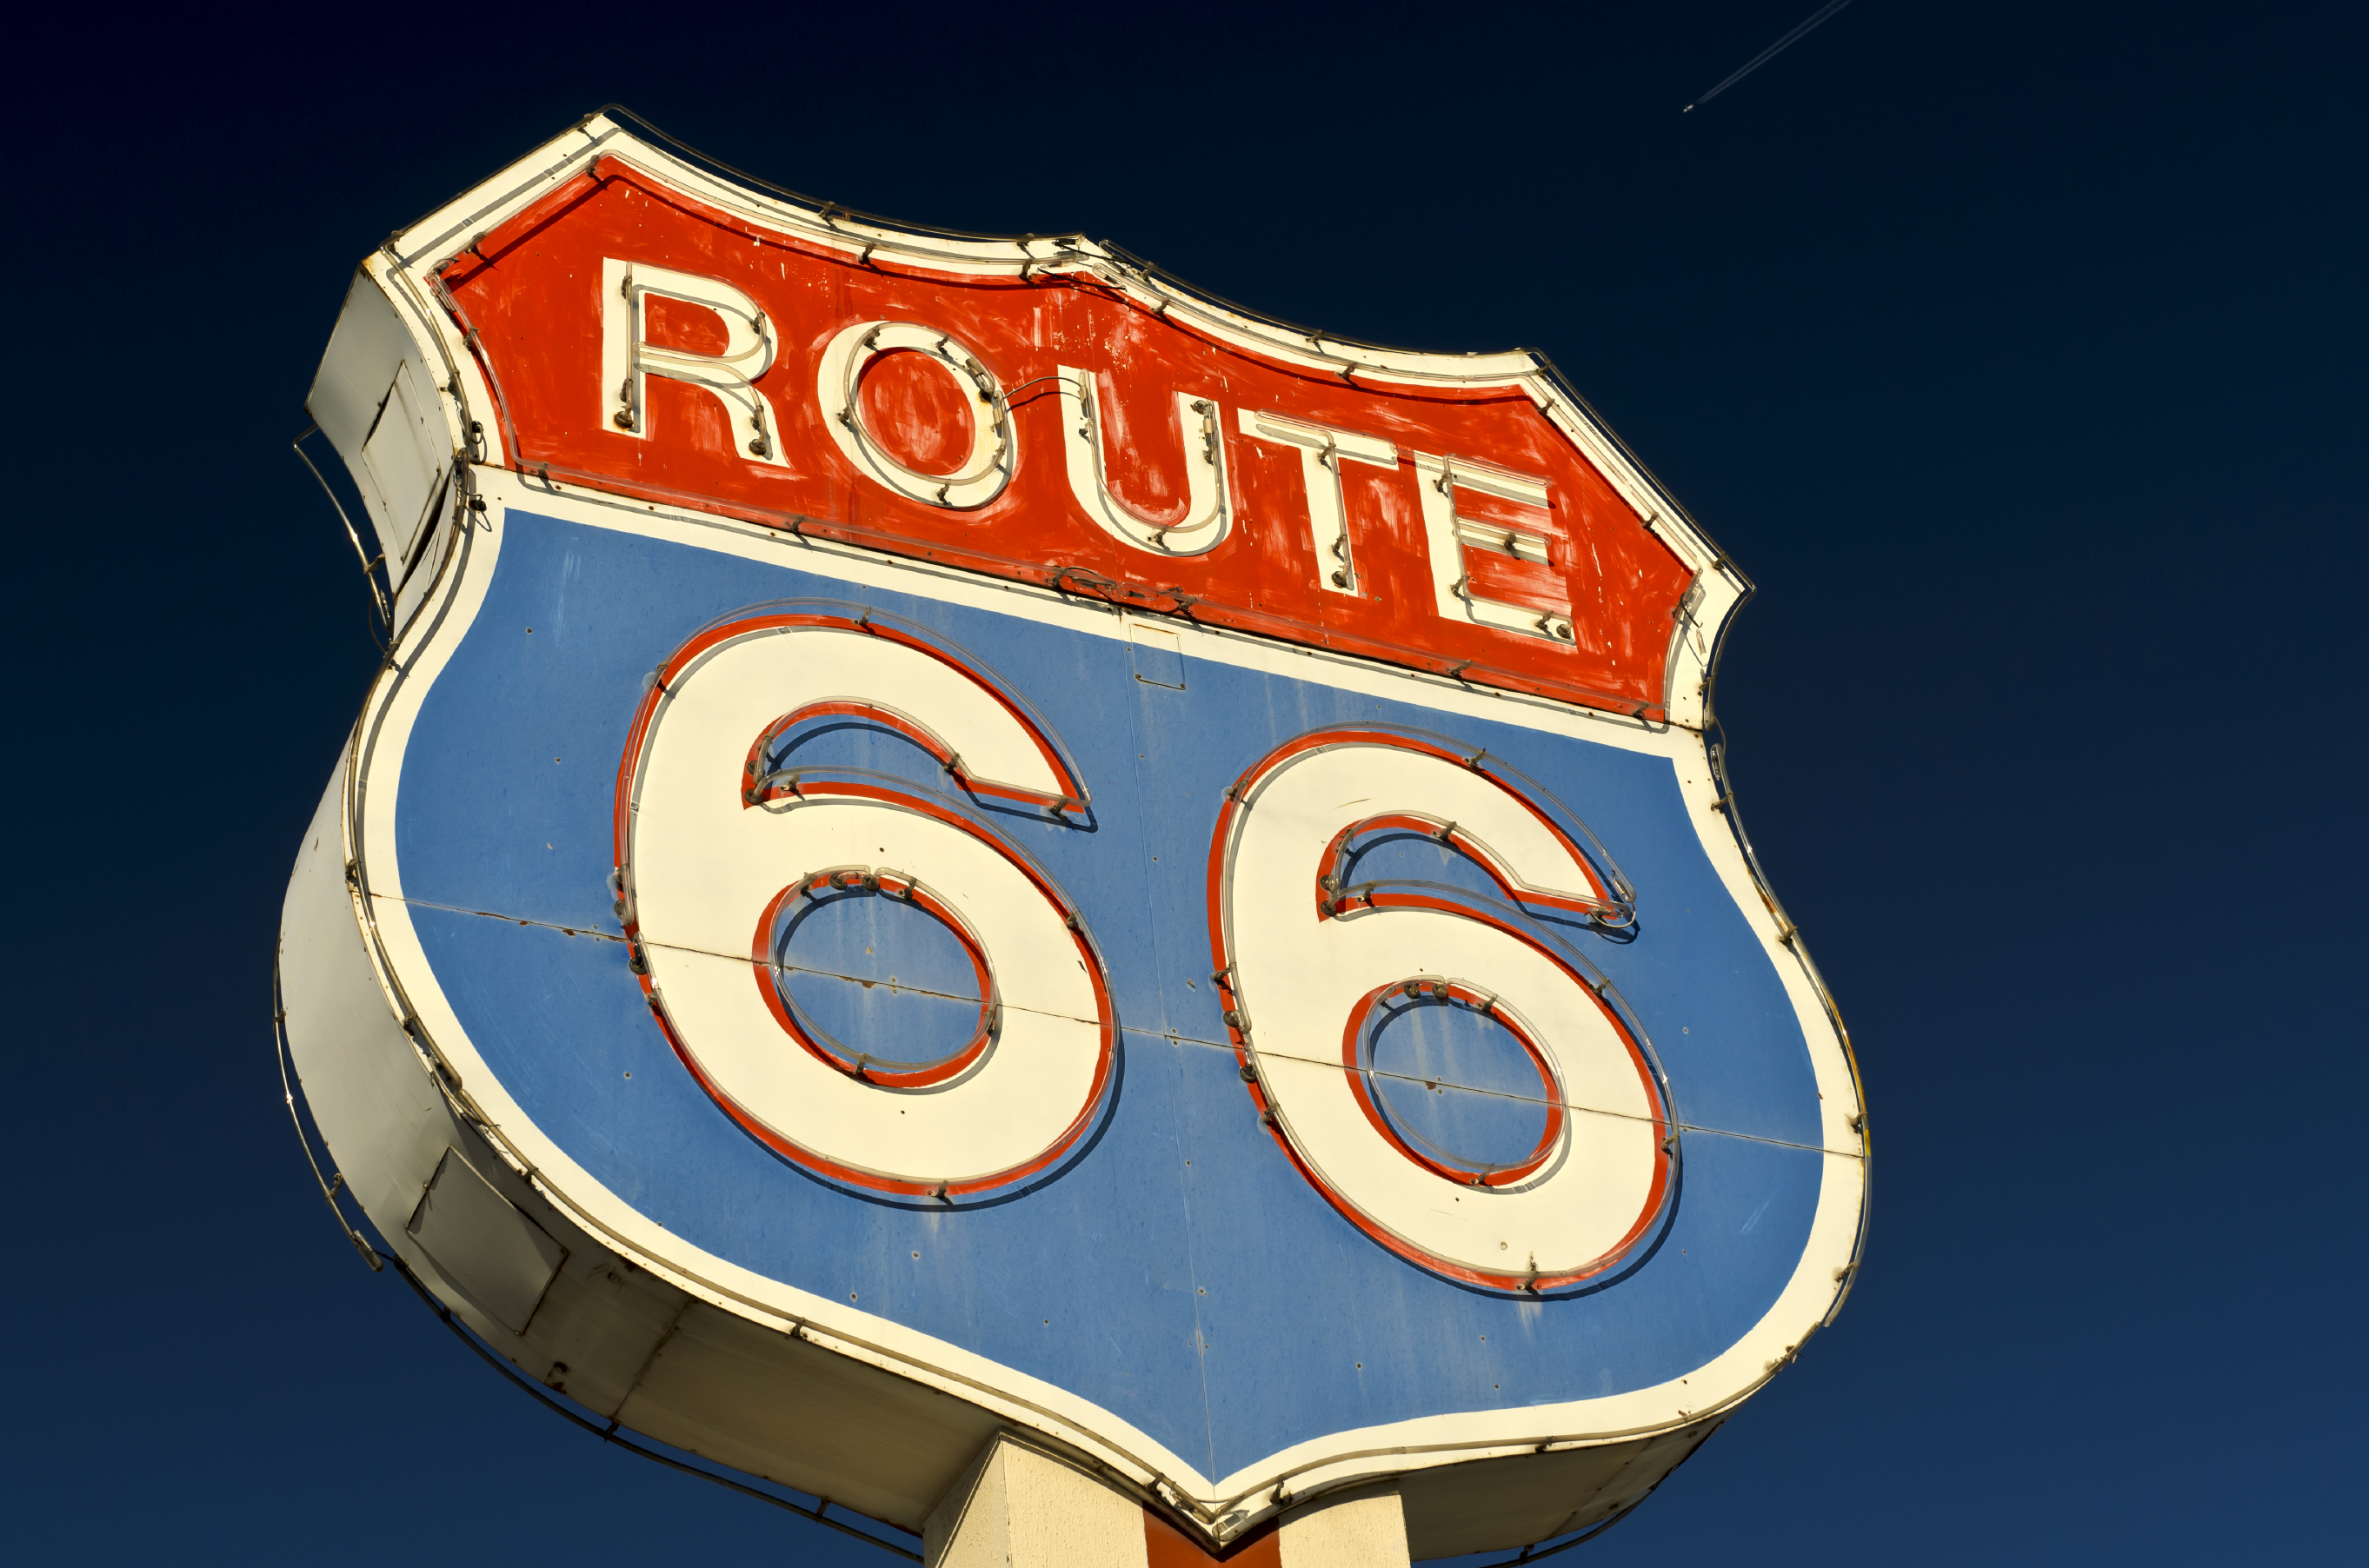 03.04.15 Route 66 sign iStock_000018902323Large